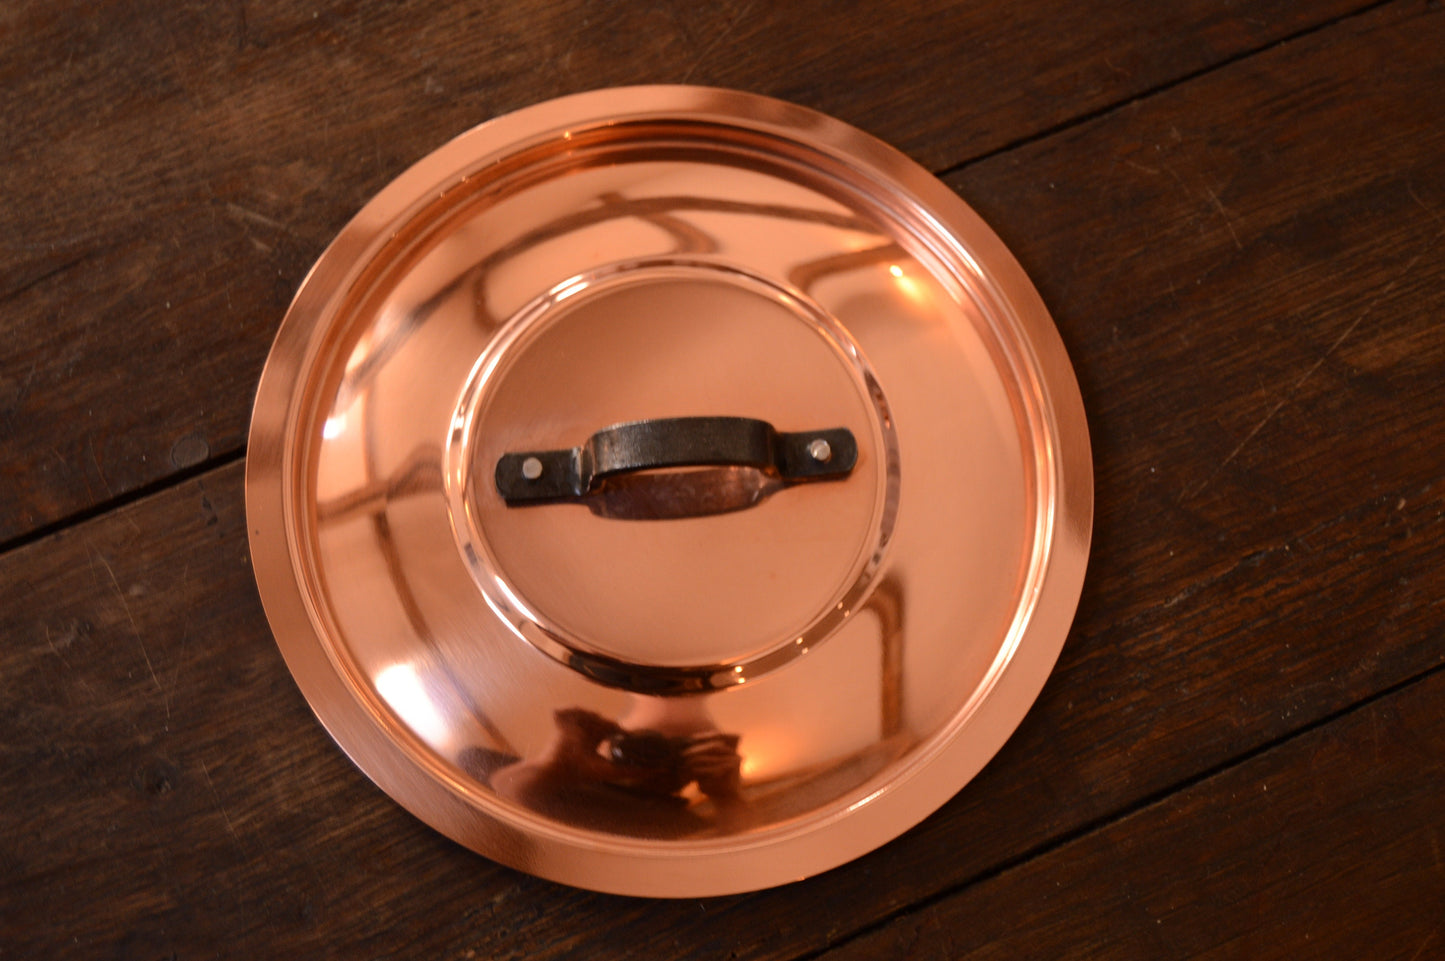 New NKC 16cm Normandy Kitchen Copper Pan Lid Made in France Fitted Copper Pan Lid Pan Quality 6 1/4" Iron Handle Tin Lined New Copper